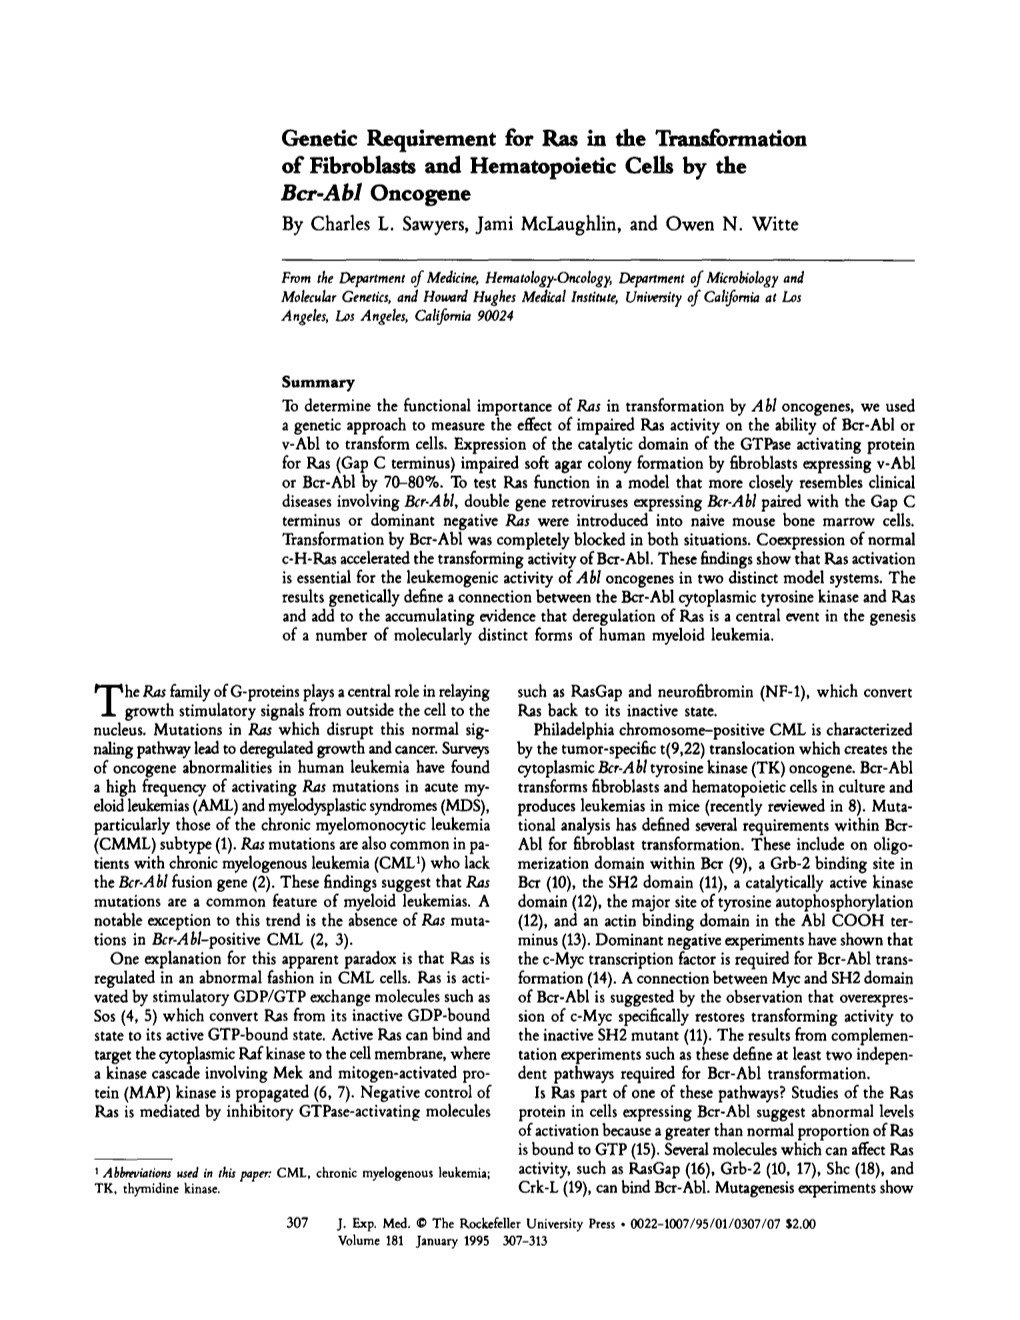 Genetic Requirement for Ras in the Transformation of Fibroblasts and Hematopoietic Cells by the Bcr-Abl Oncogene by Charles L